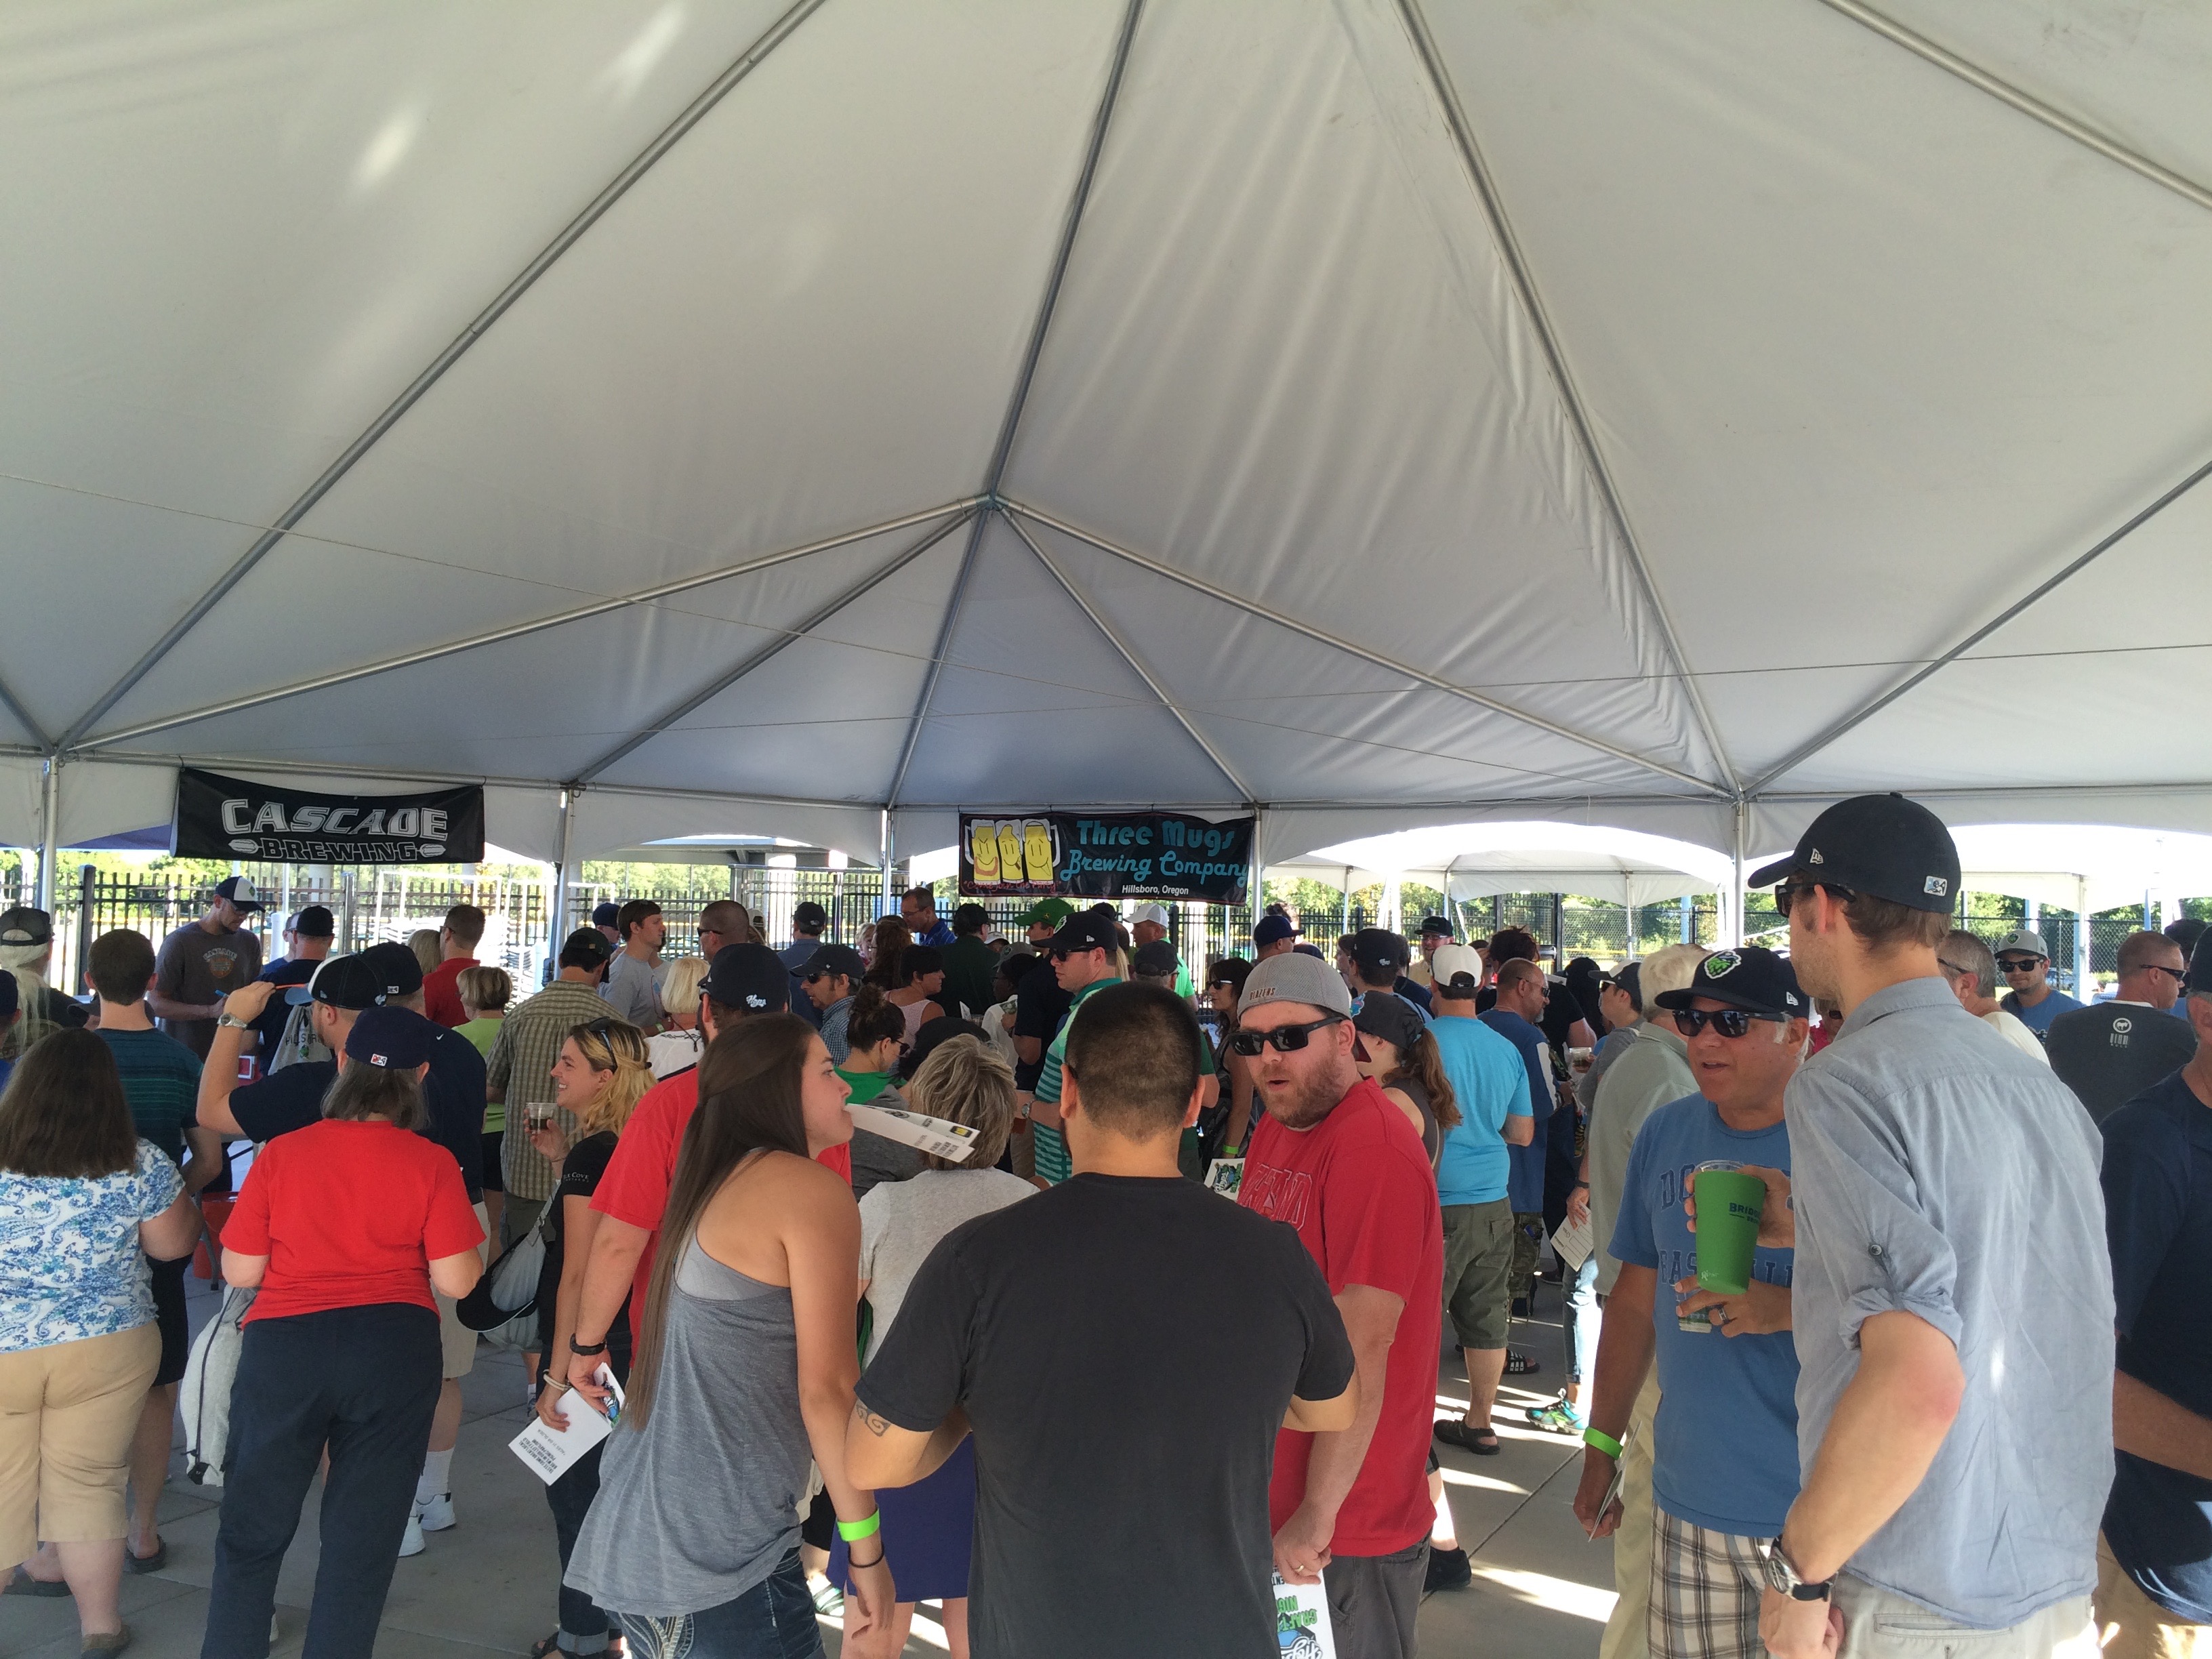 Craft Beer Night during the 2015 season at the Hillsboro Hops.